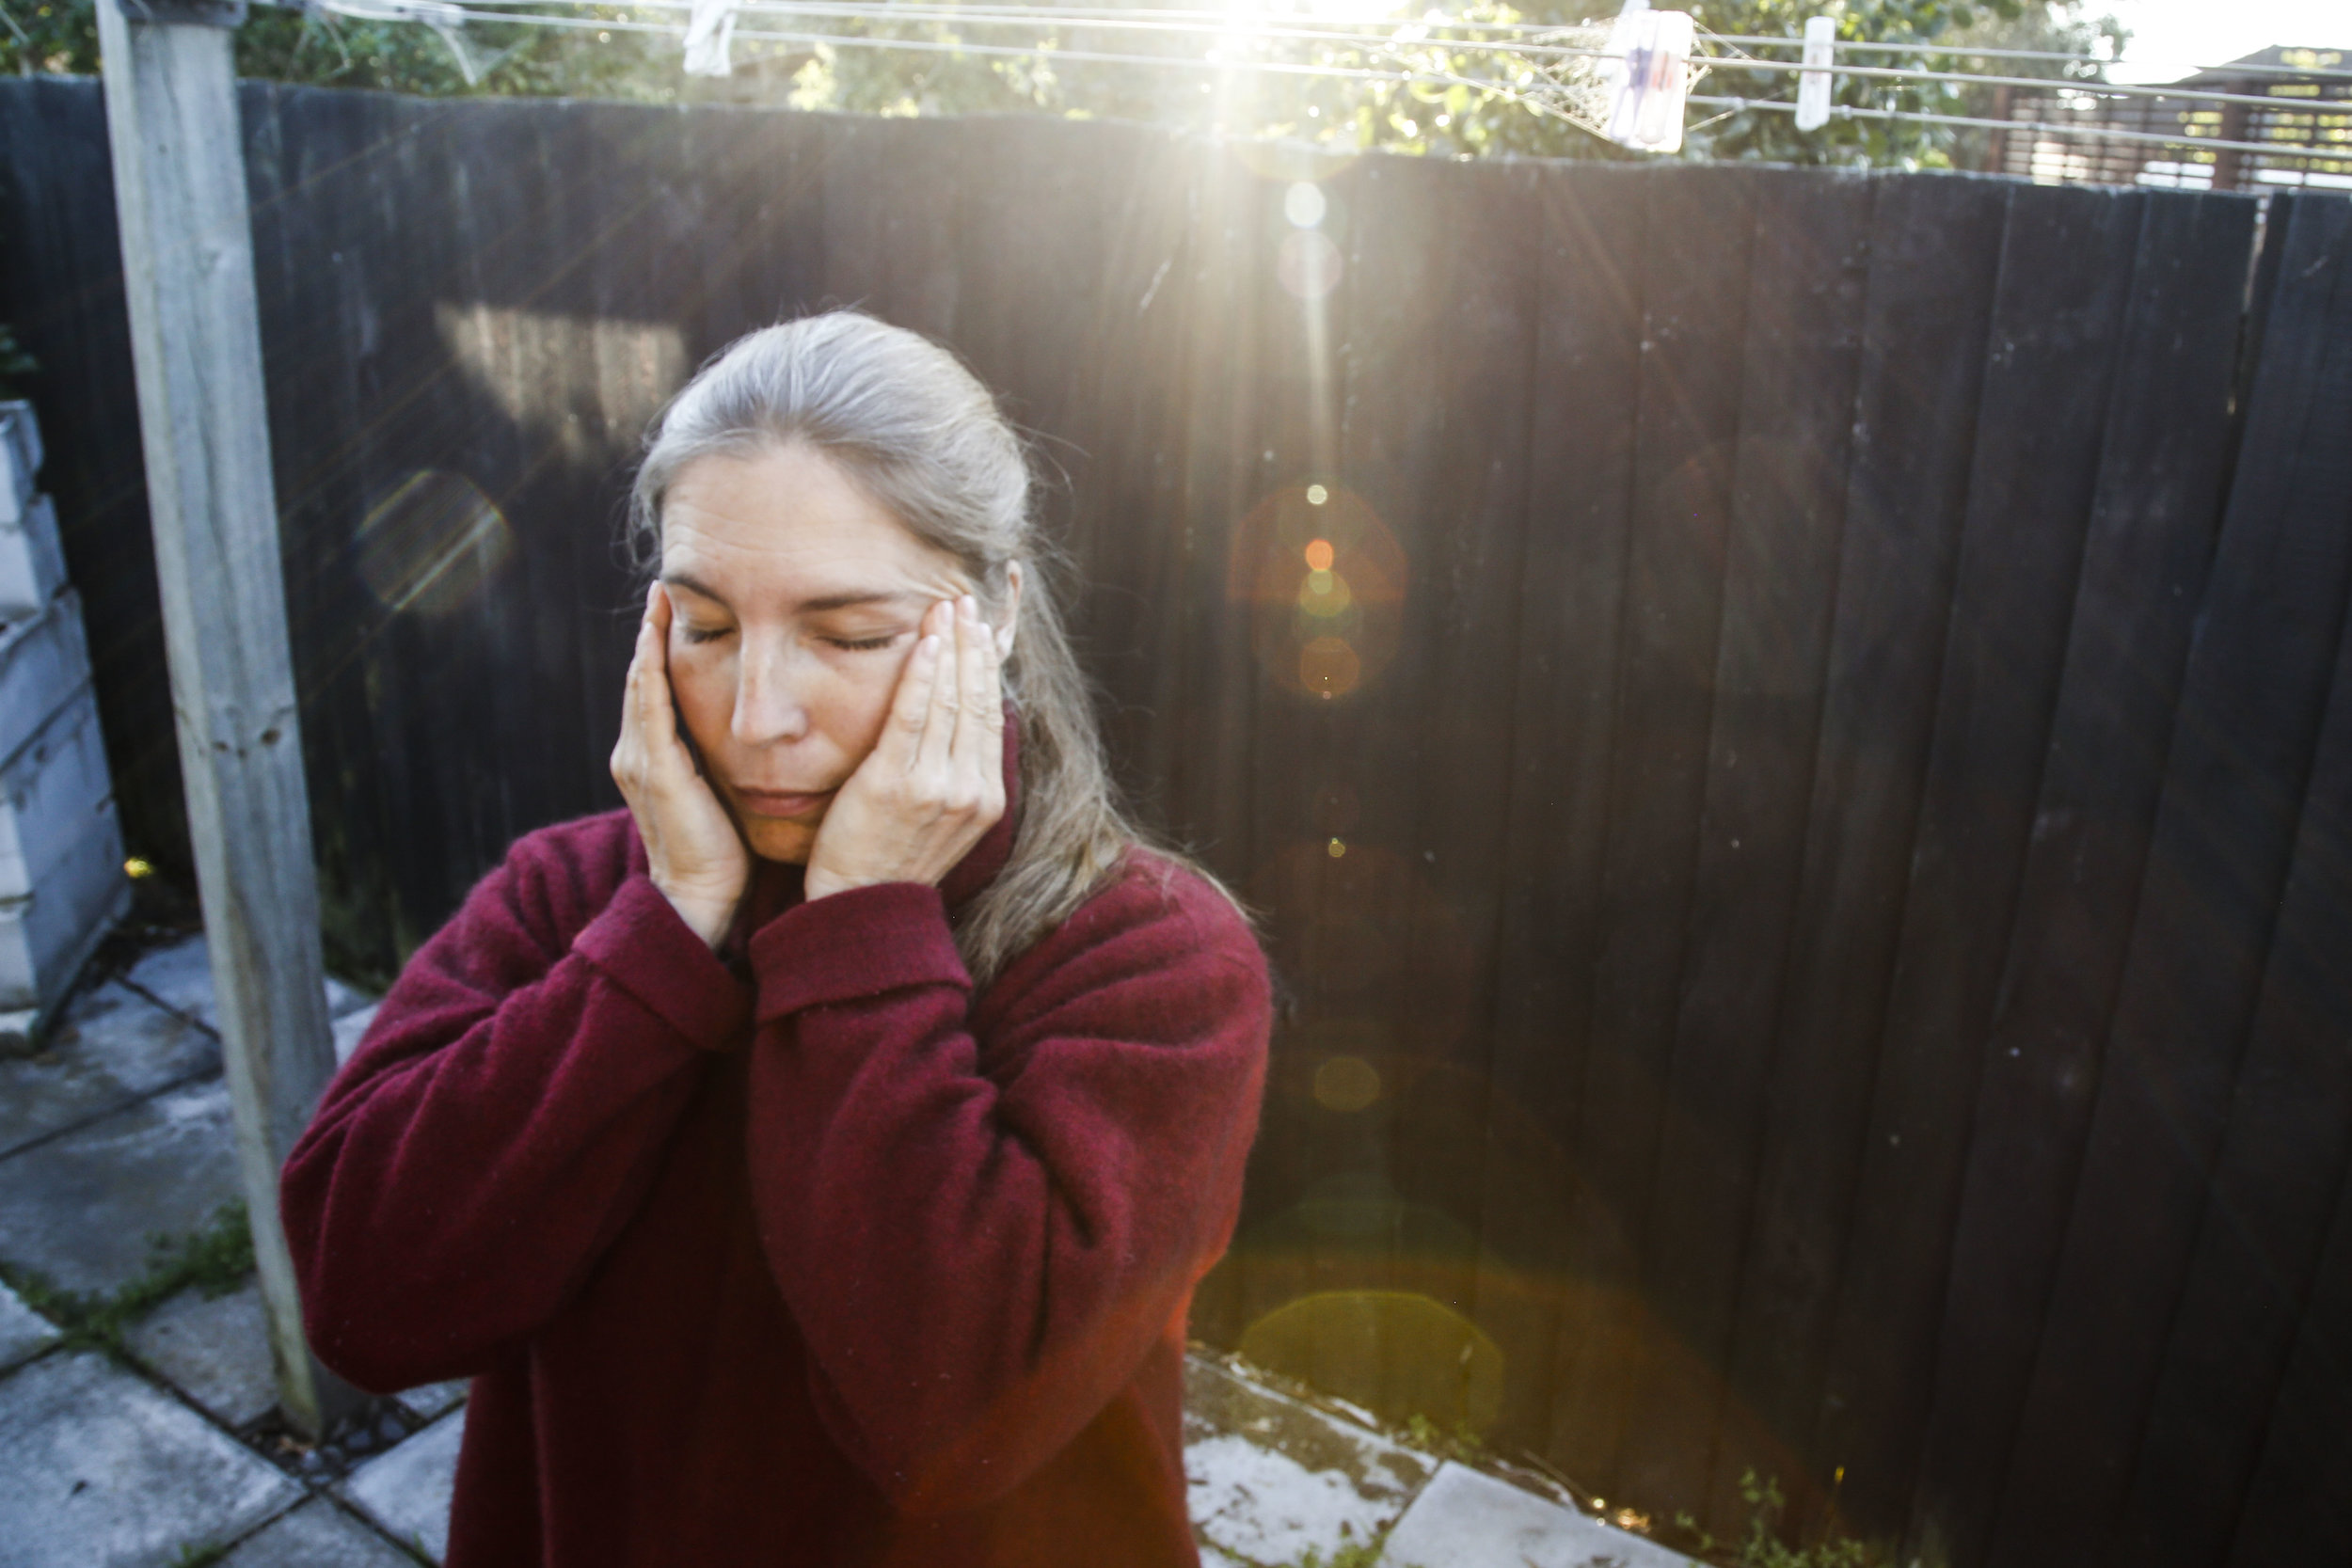  Olli closes her eyes for a moment in between portraits at her Christchurch, NZ home. "I was depressed for 16 years on and off without me knowing it or being able to label it as depression. Getting the emotional help that I needed and not taking myse